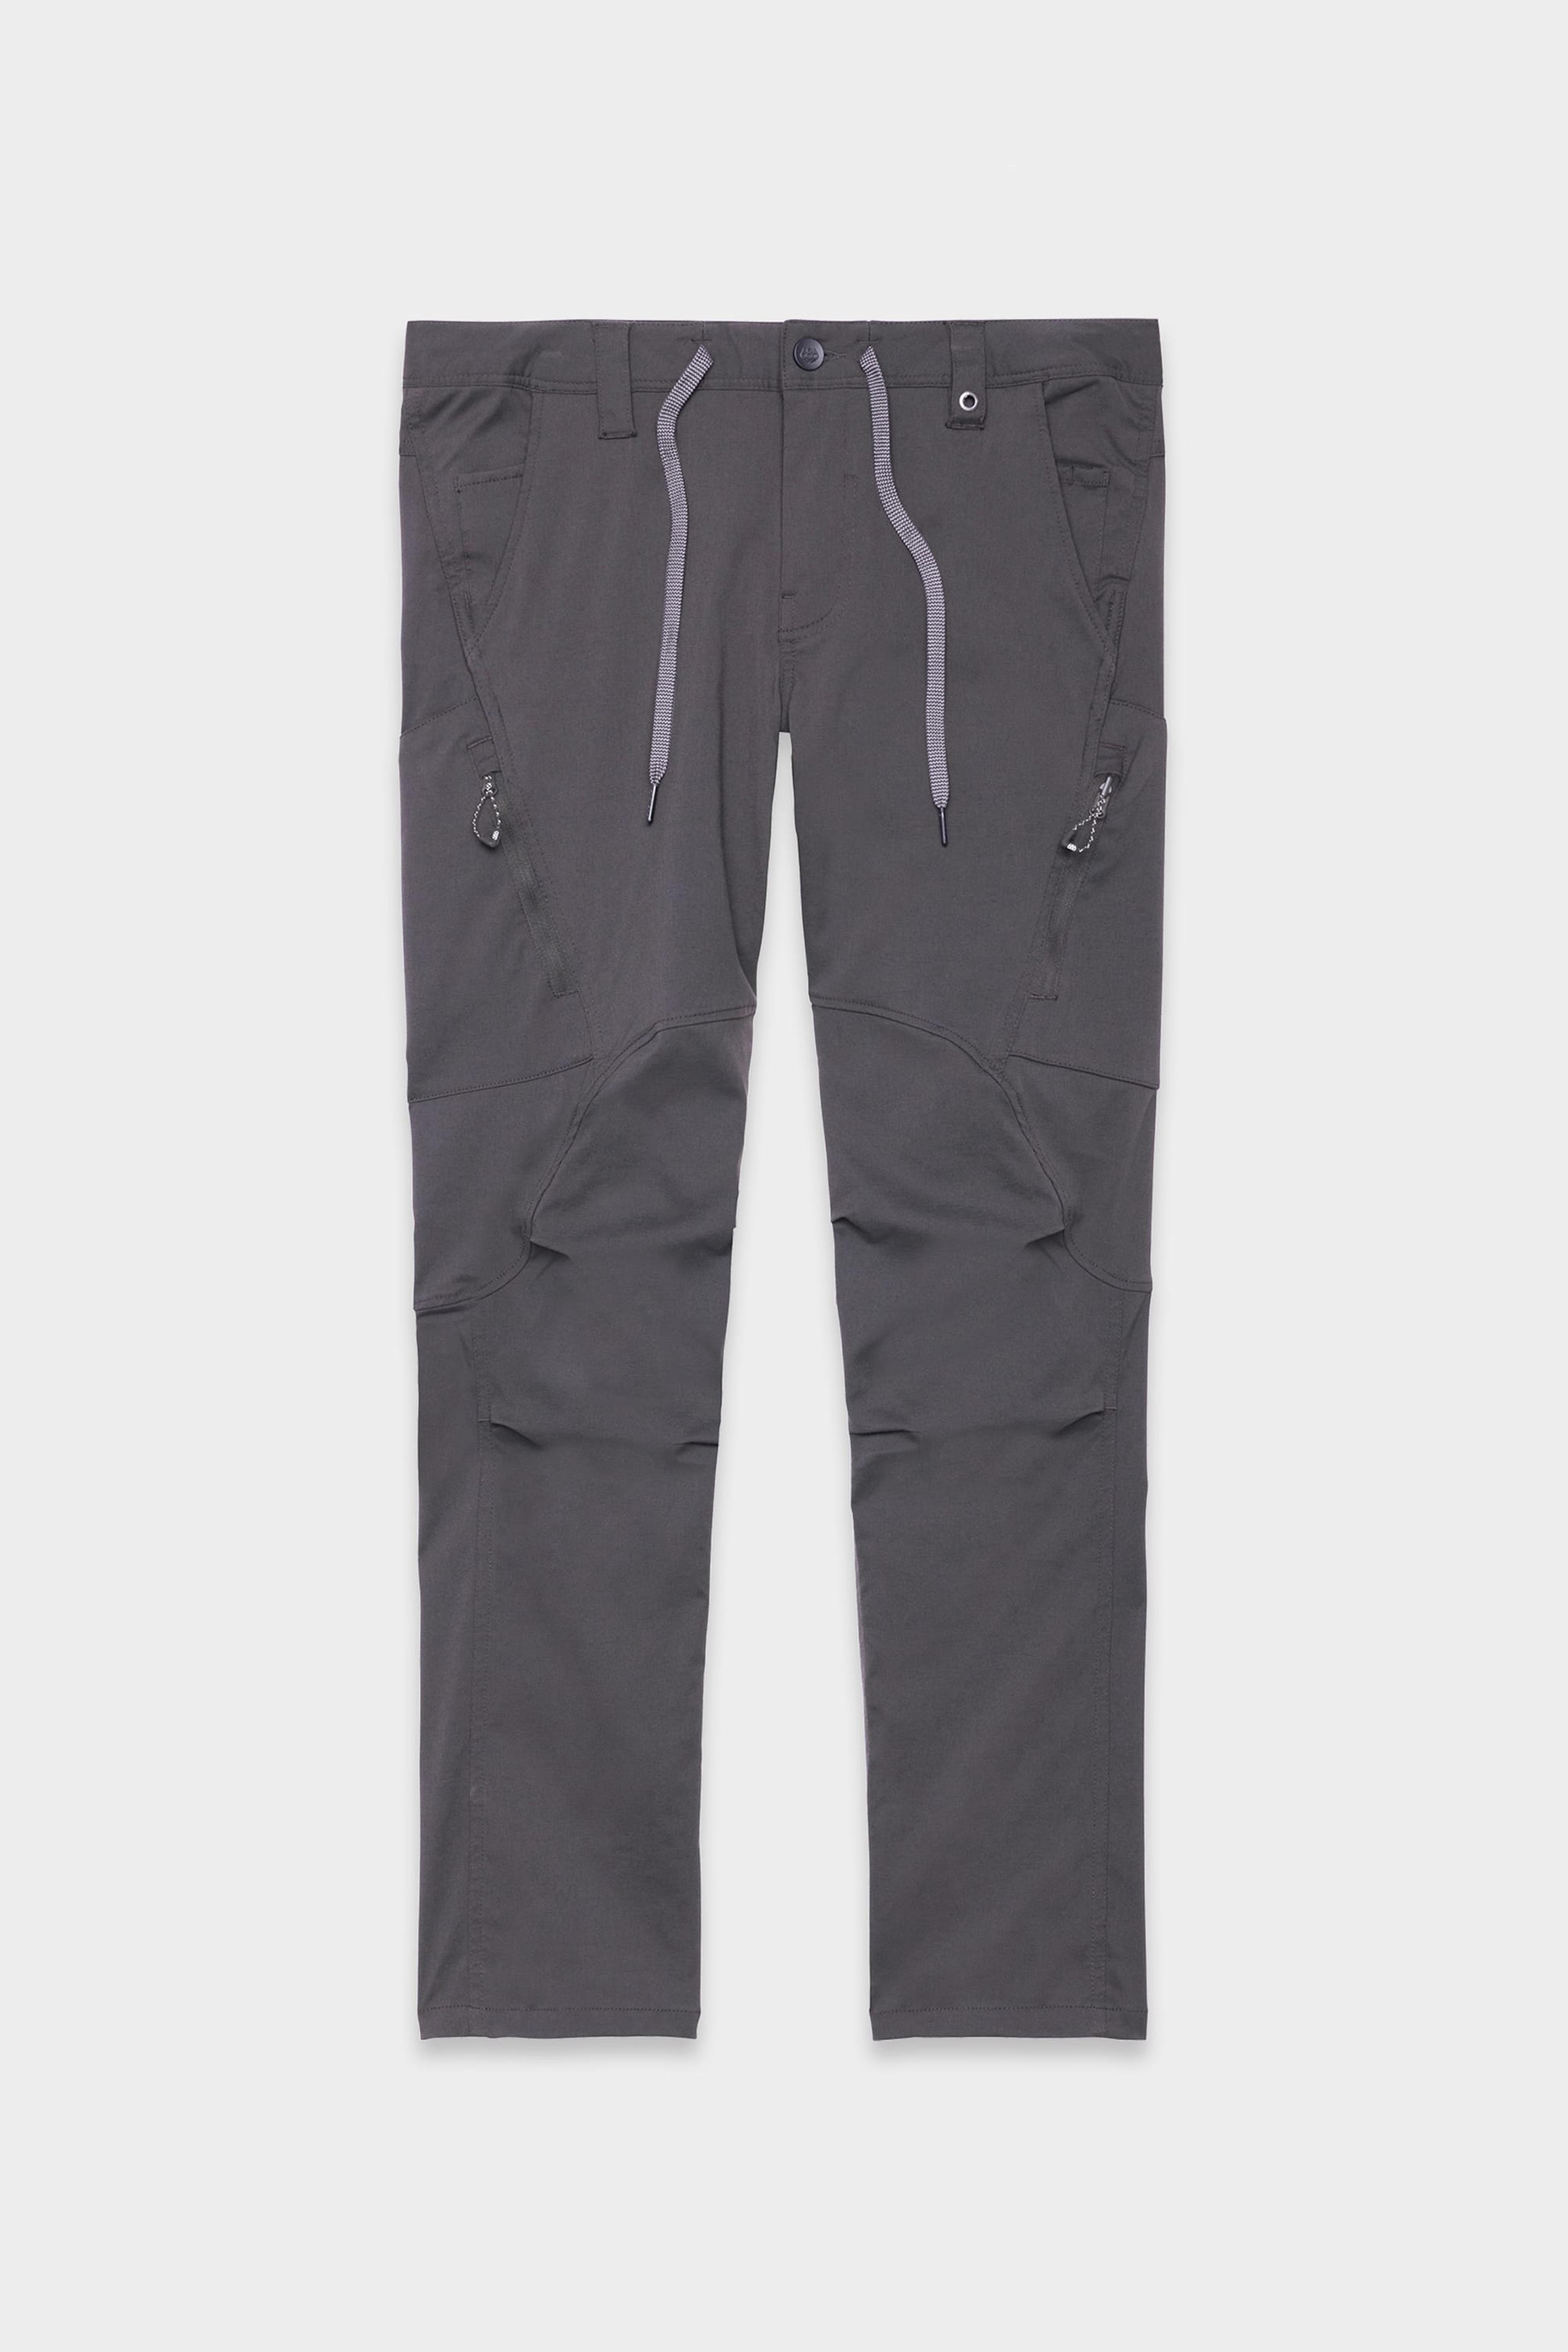 Alternate View 48 of 686 Men's Anything Cargo Pant - Slim Fit